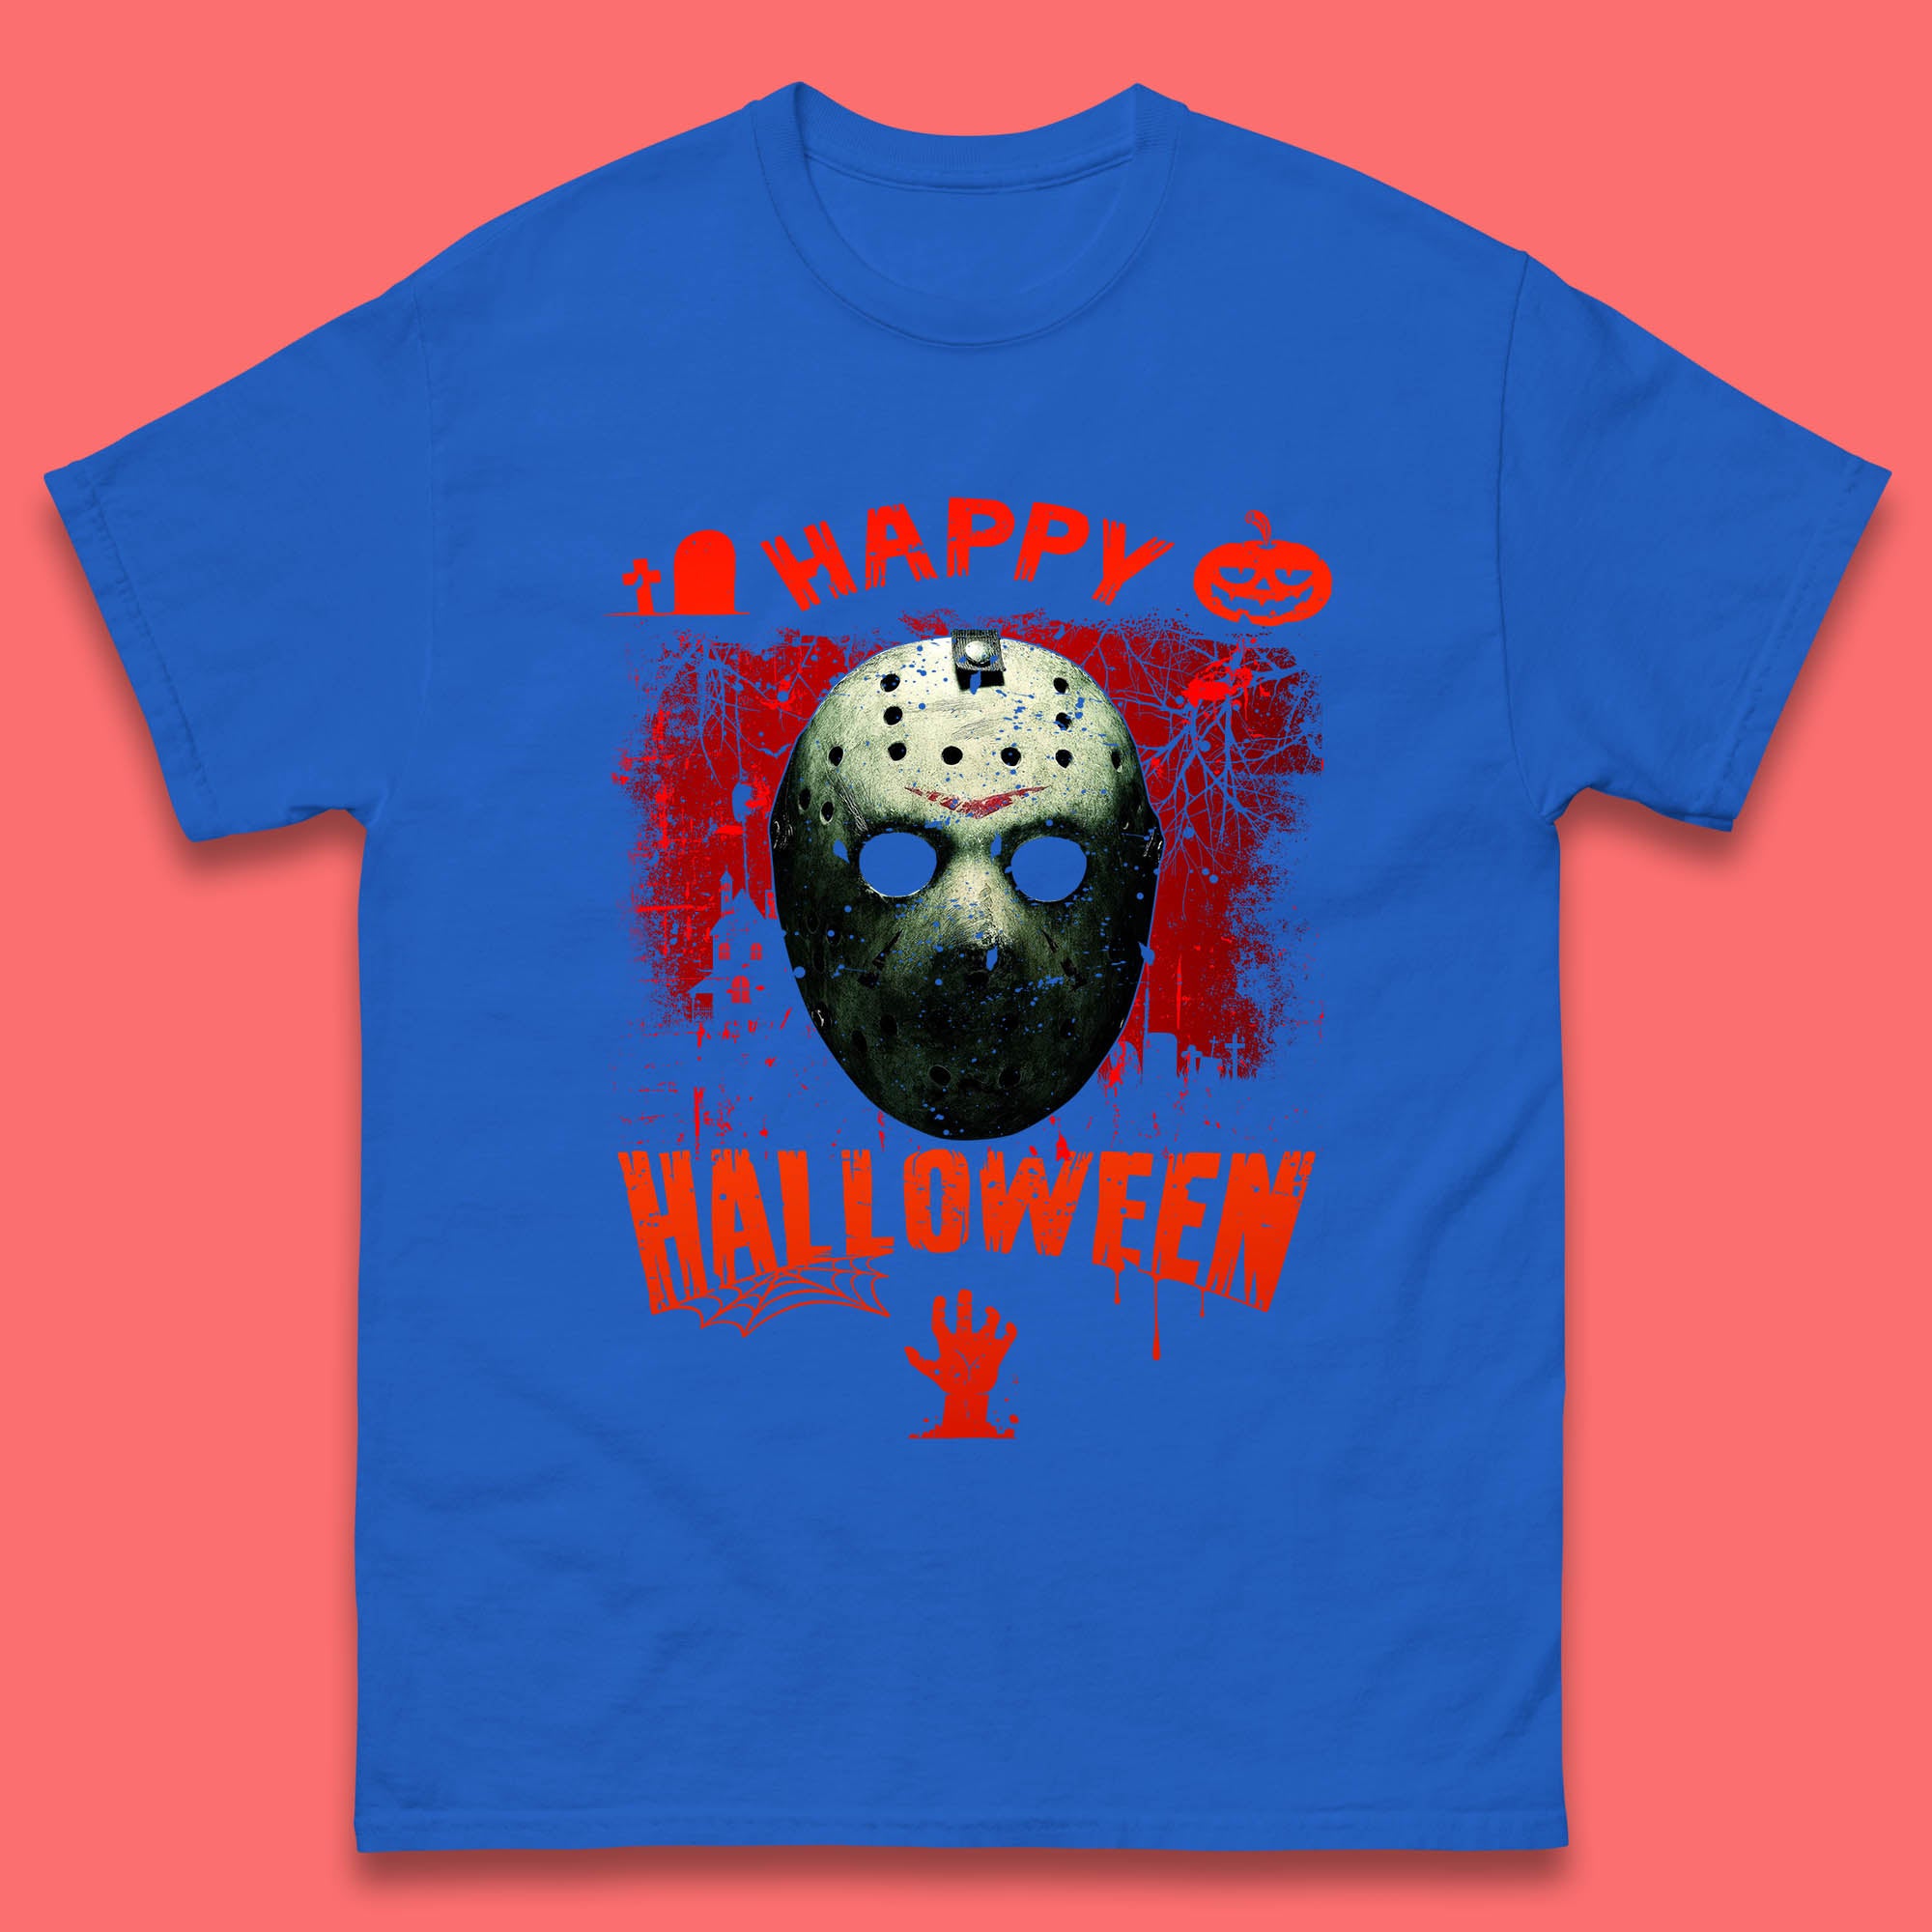 Happy Halloween Jason Voorhees Face Mask Halloween Friday The 13th Horror Movie Mens Tee Top